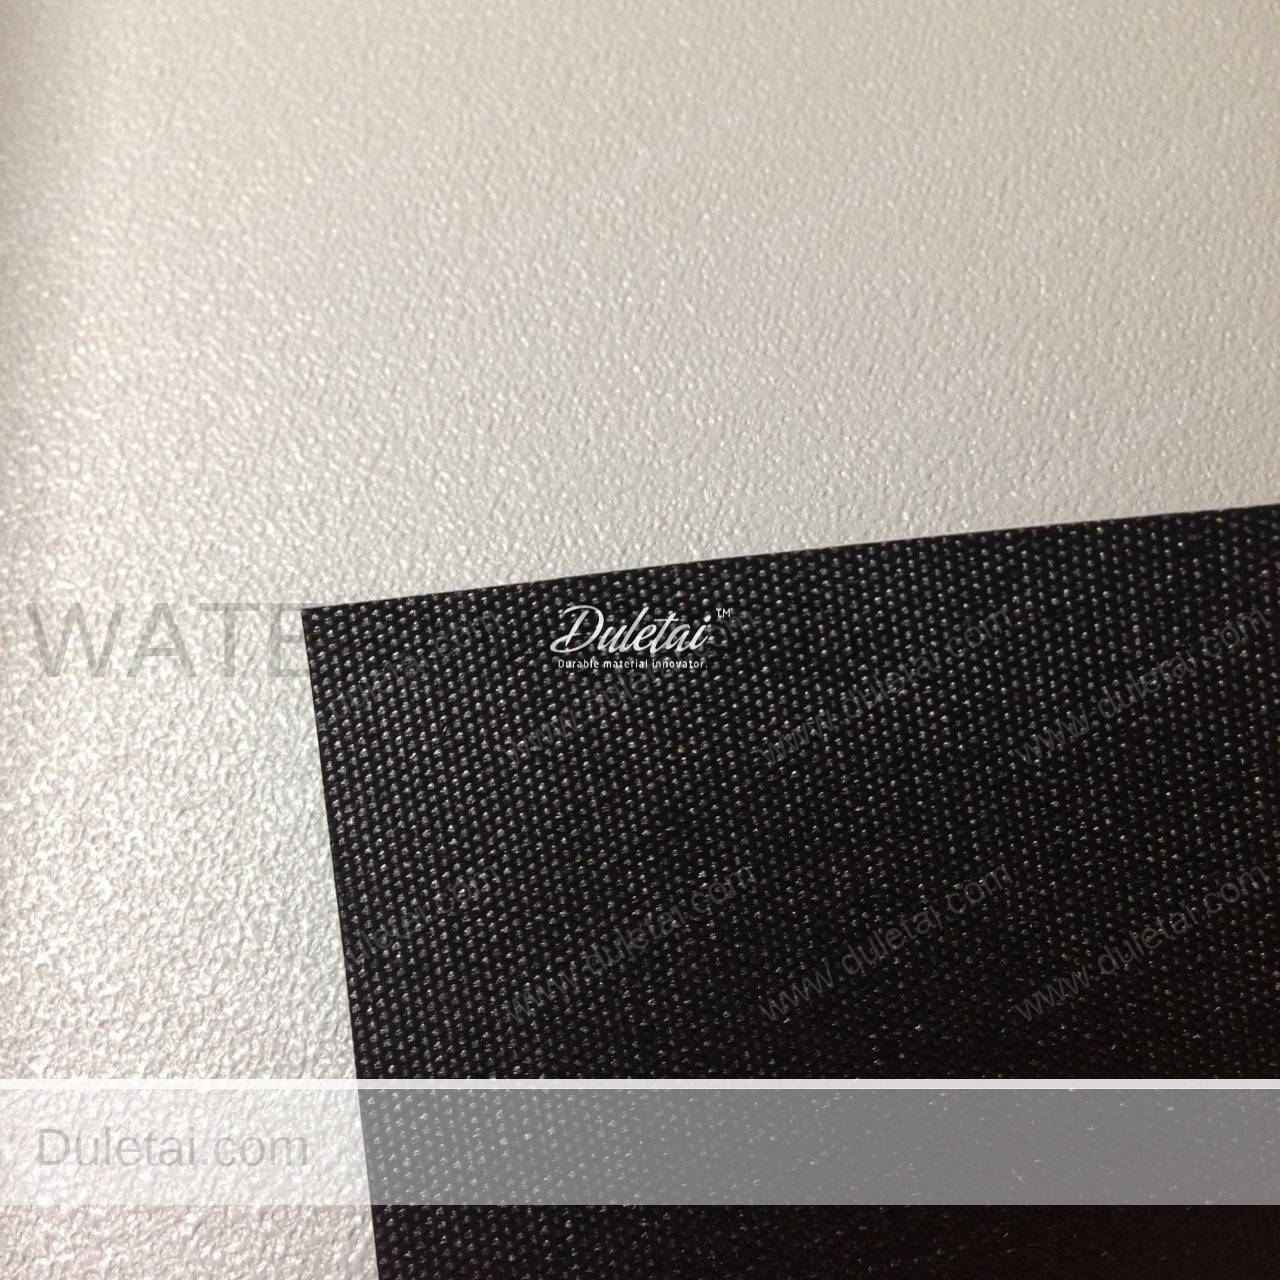 woven projection screen fabric